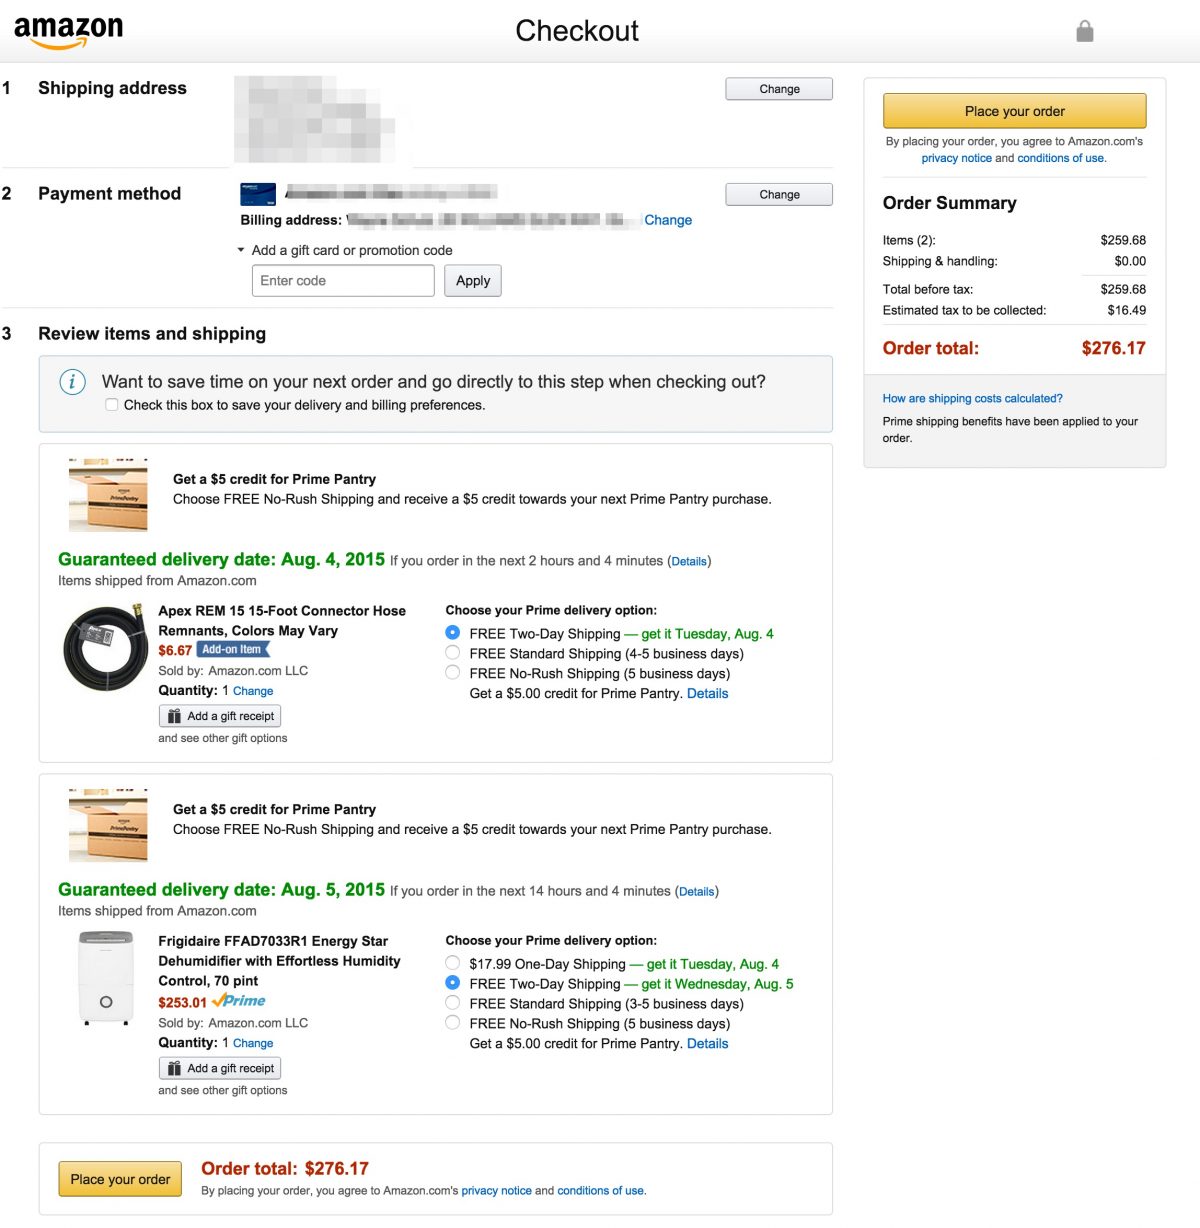 Amazon Offering $5 Prime Pantry Credit for No-Rush Shipping!